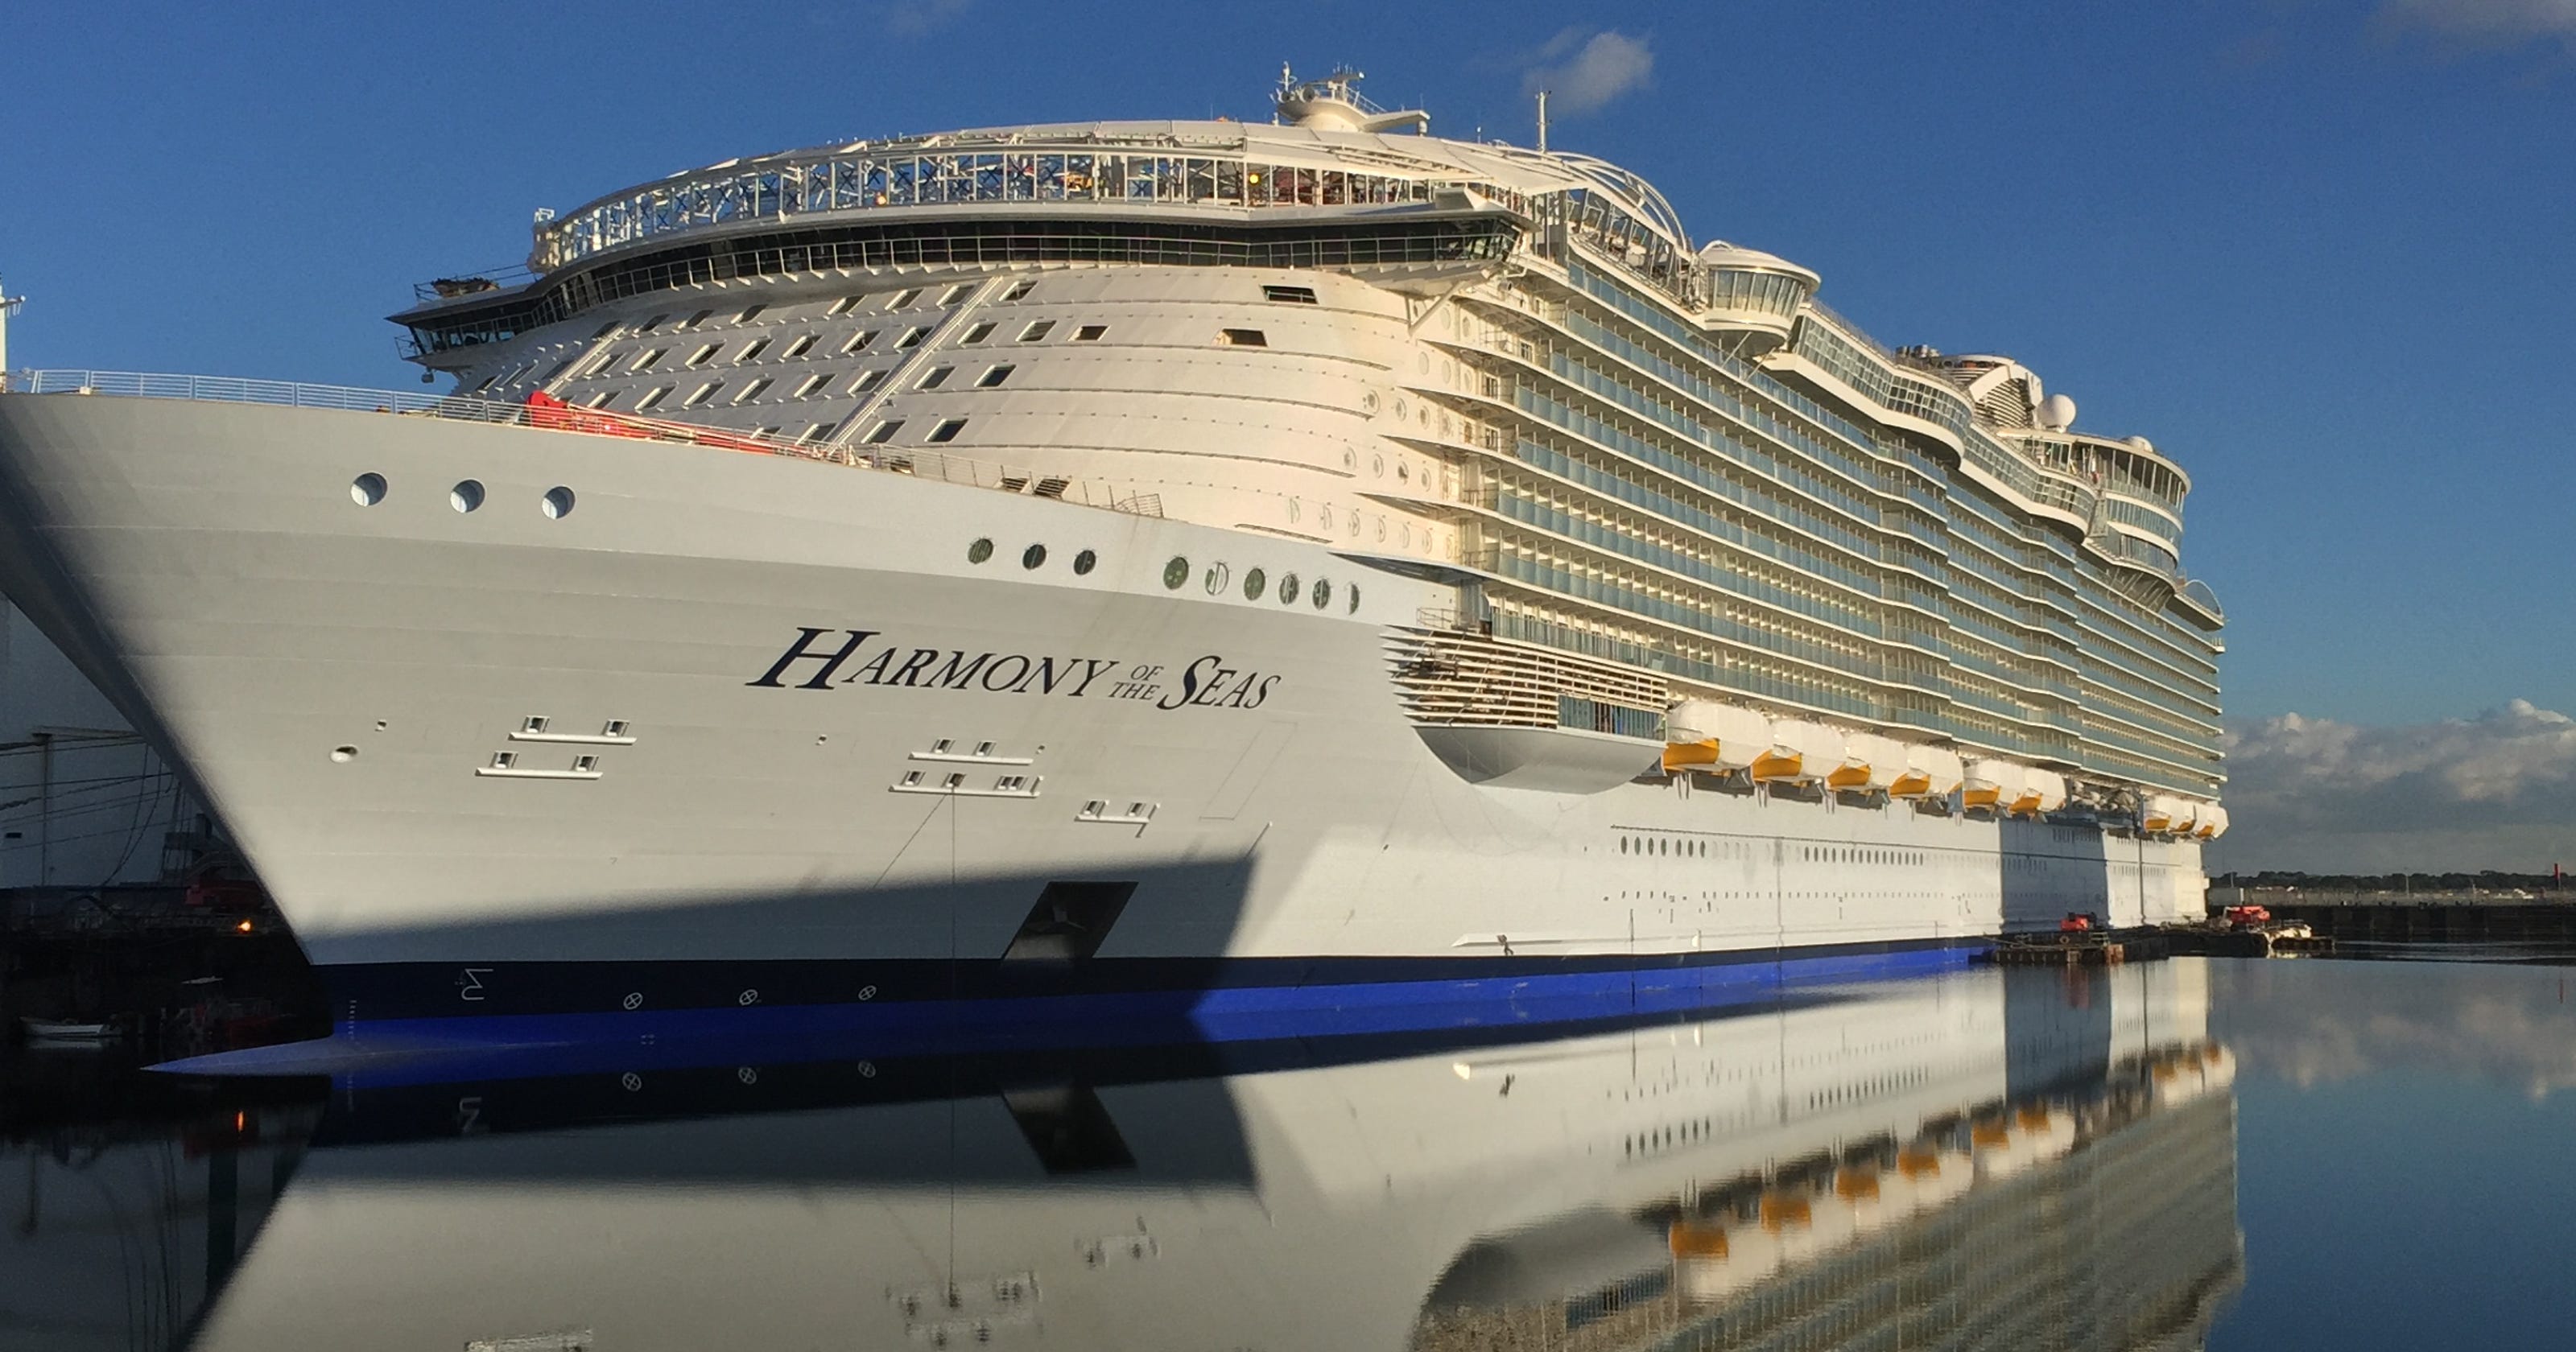 world's largest ever cruise ship sets sail